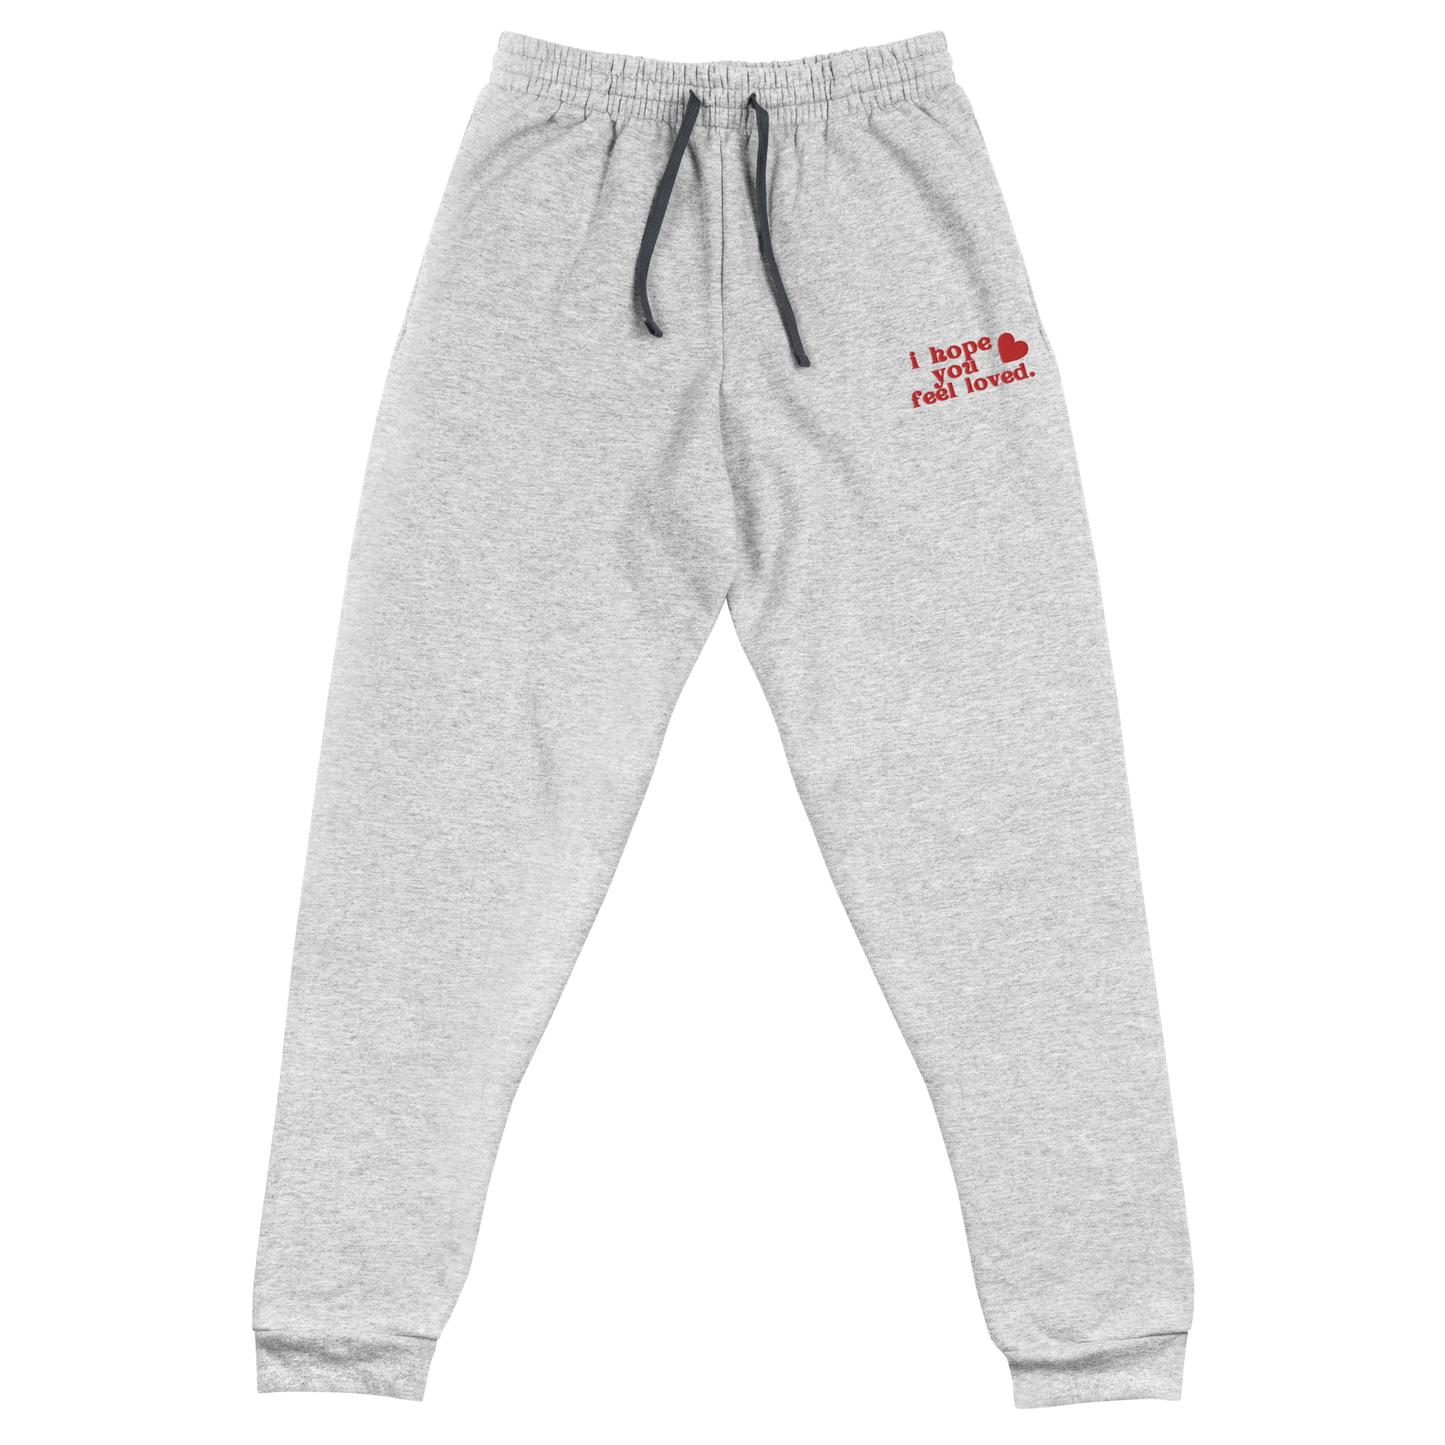 LIMITED EDITION Valentine's Day Sweatpants